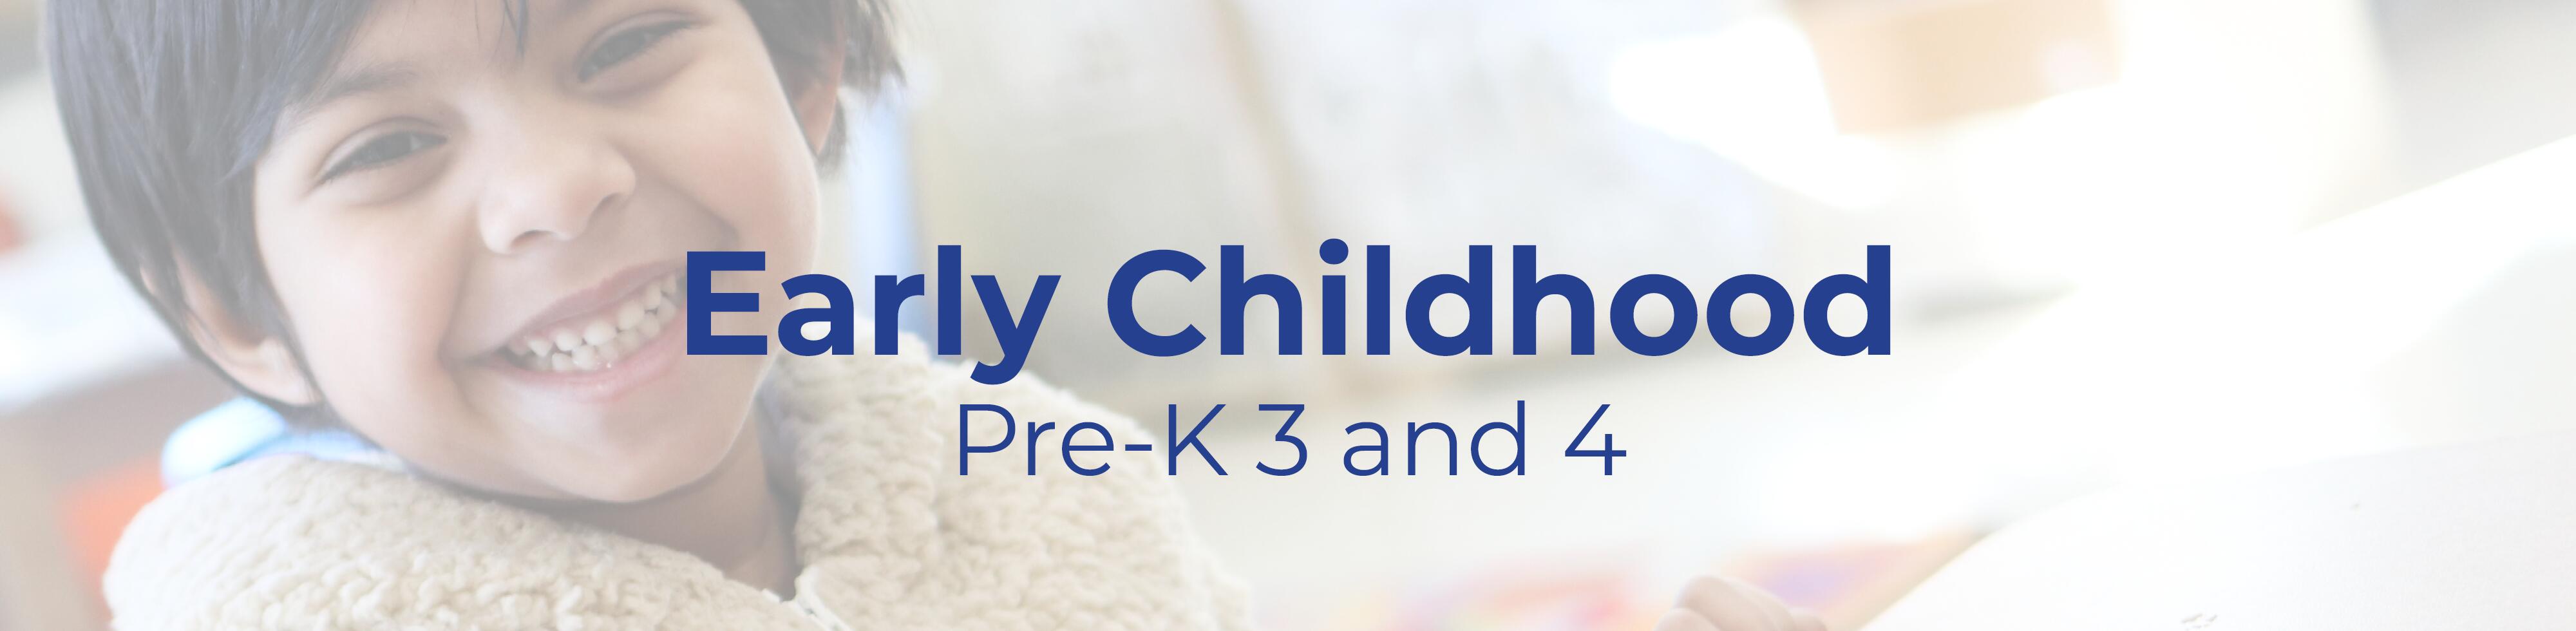 Text that reads "Early Childhood Pre-K 3 and 4" overlaid on a picture of a student working